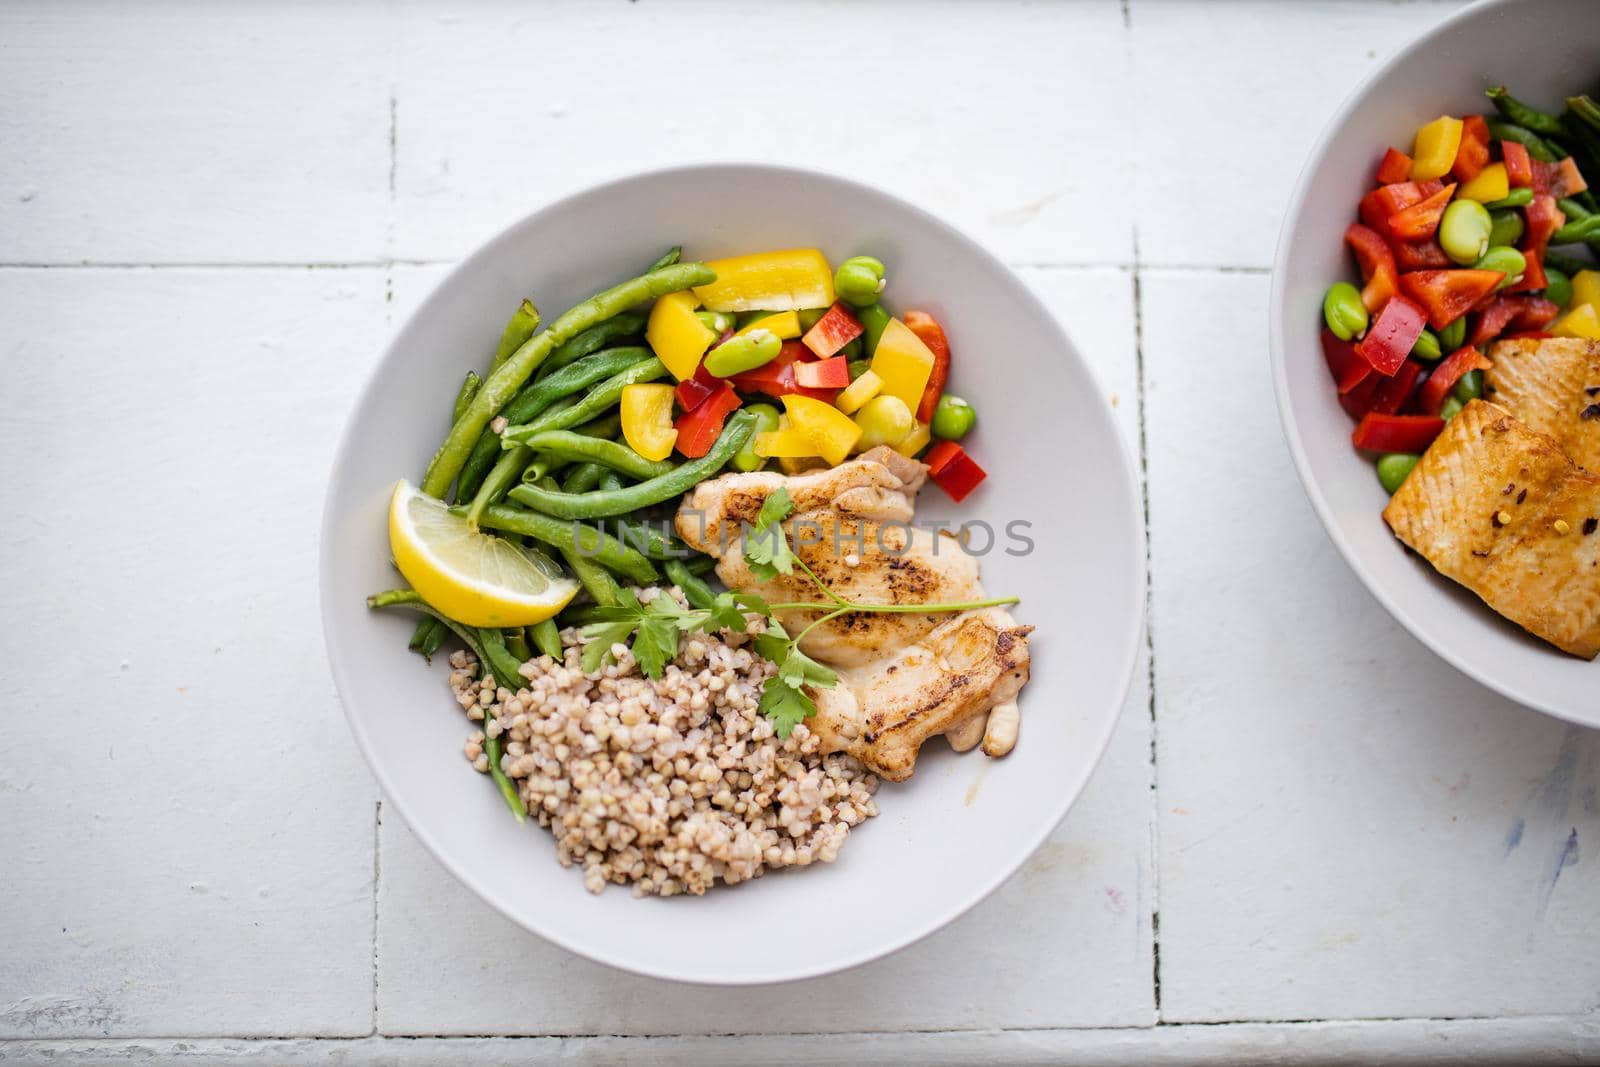 Top view of chicken and buckwheat dish with green beans, broad beans, tomato, and pepper slices. Nutritious dishes with vegetables and meat on white plates. Healthy balanced diet